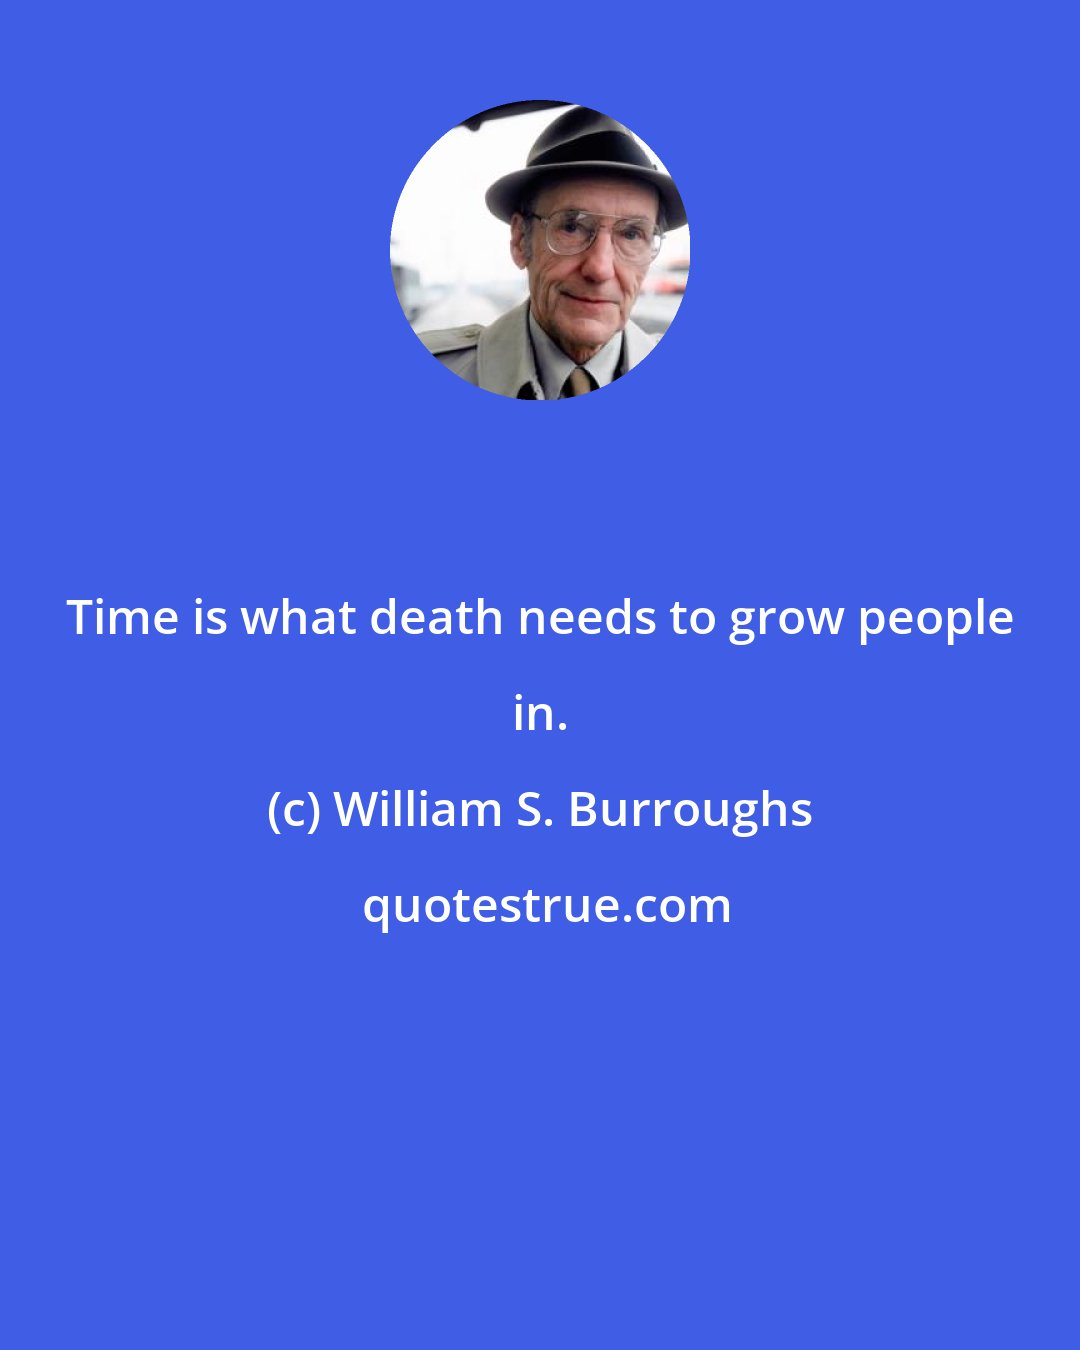 William S. Burroughs: Time is what death needs to grow people in.